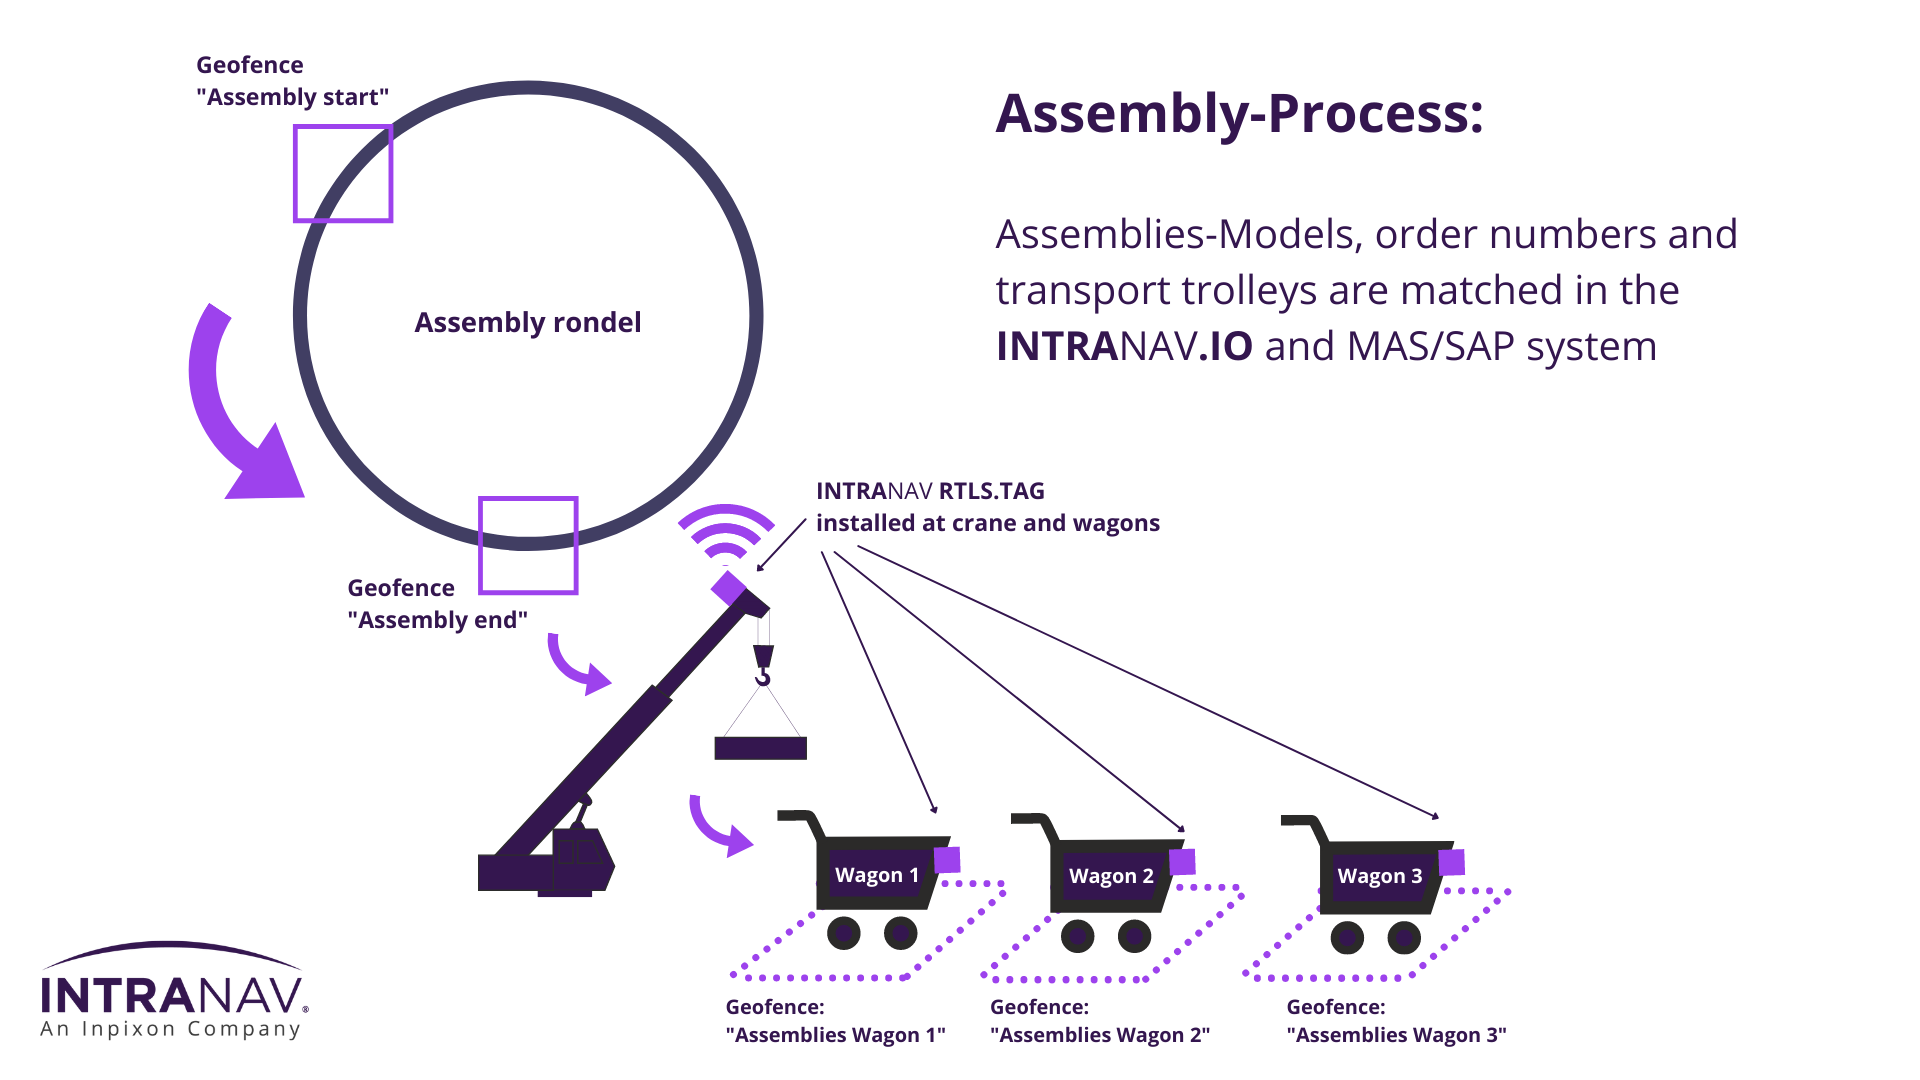 INTRANAV, an Inpixon company's assemb;y process for the order matching of wagons and trolleys.